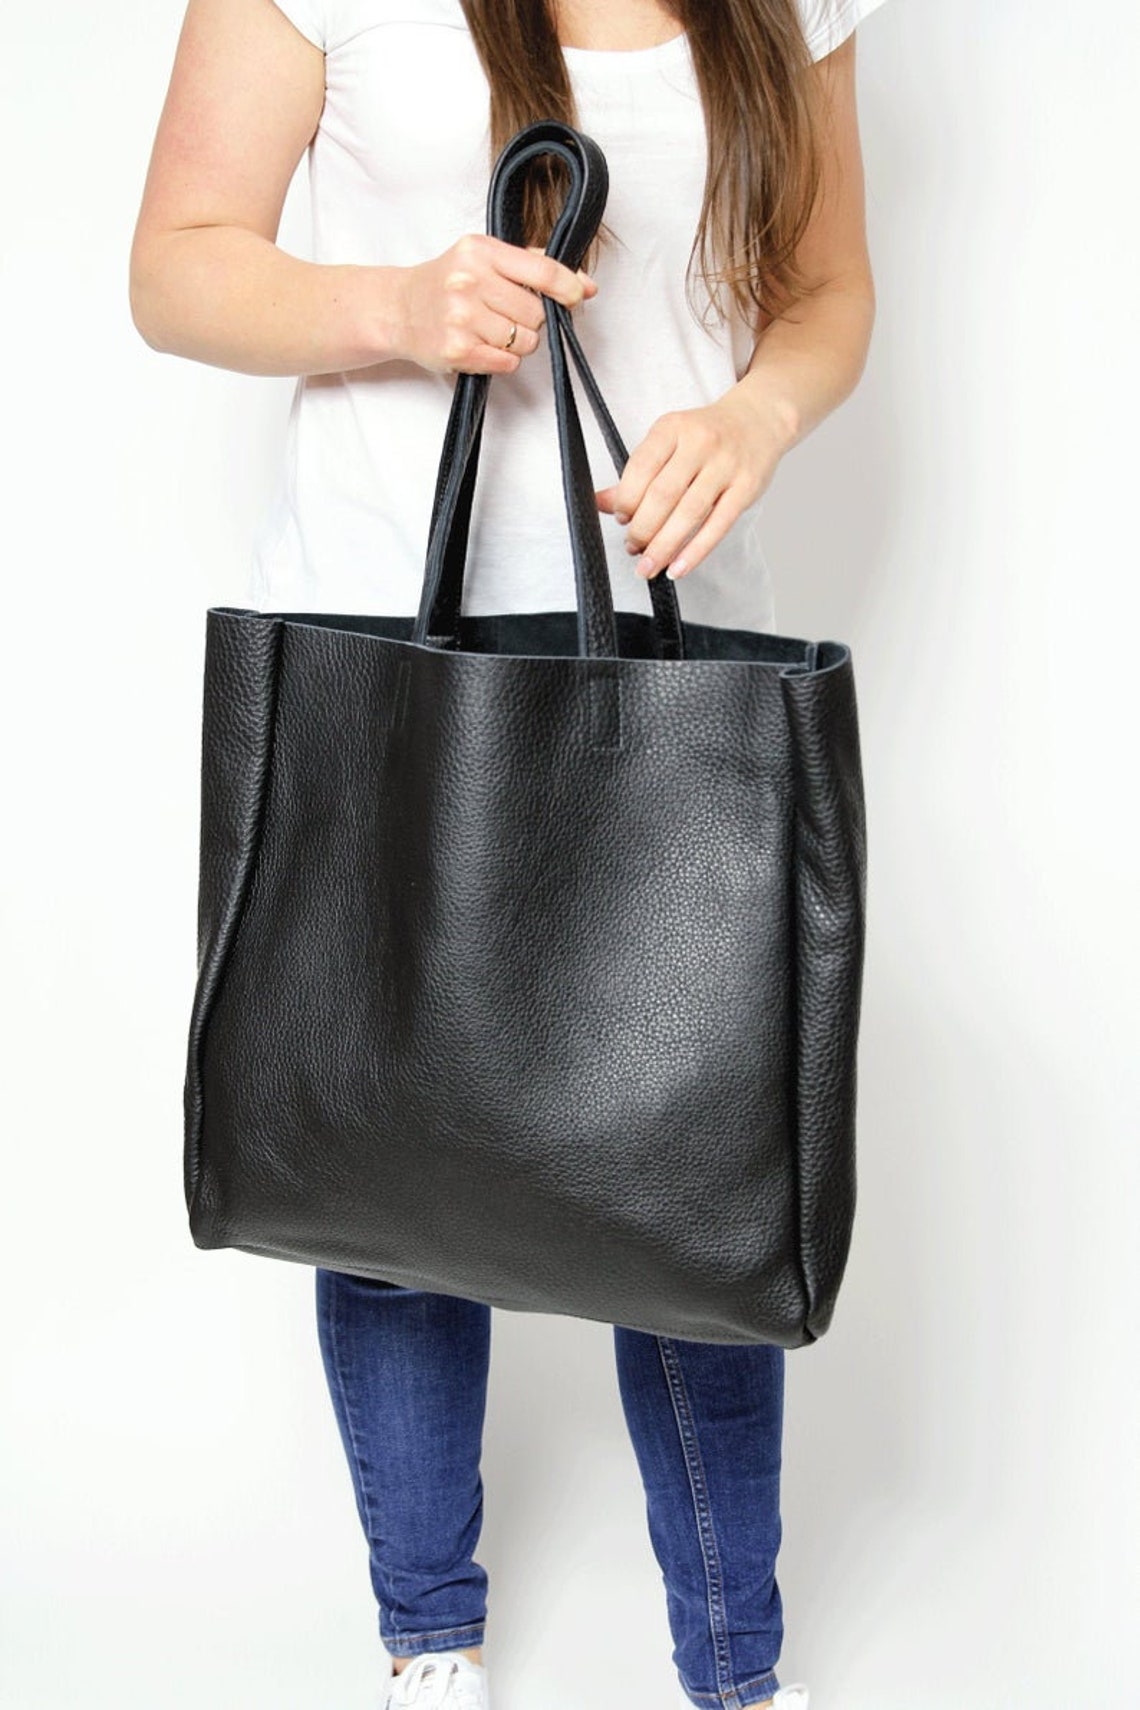 Leather Tote Bag for Women Large Tote Bag for Work Black - Etsy